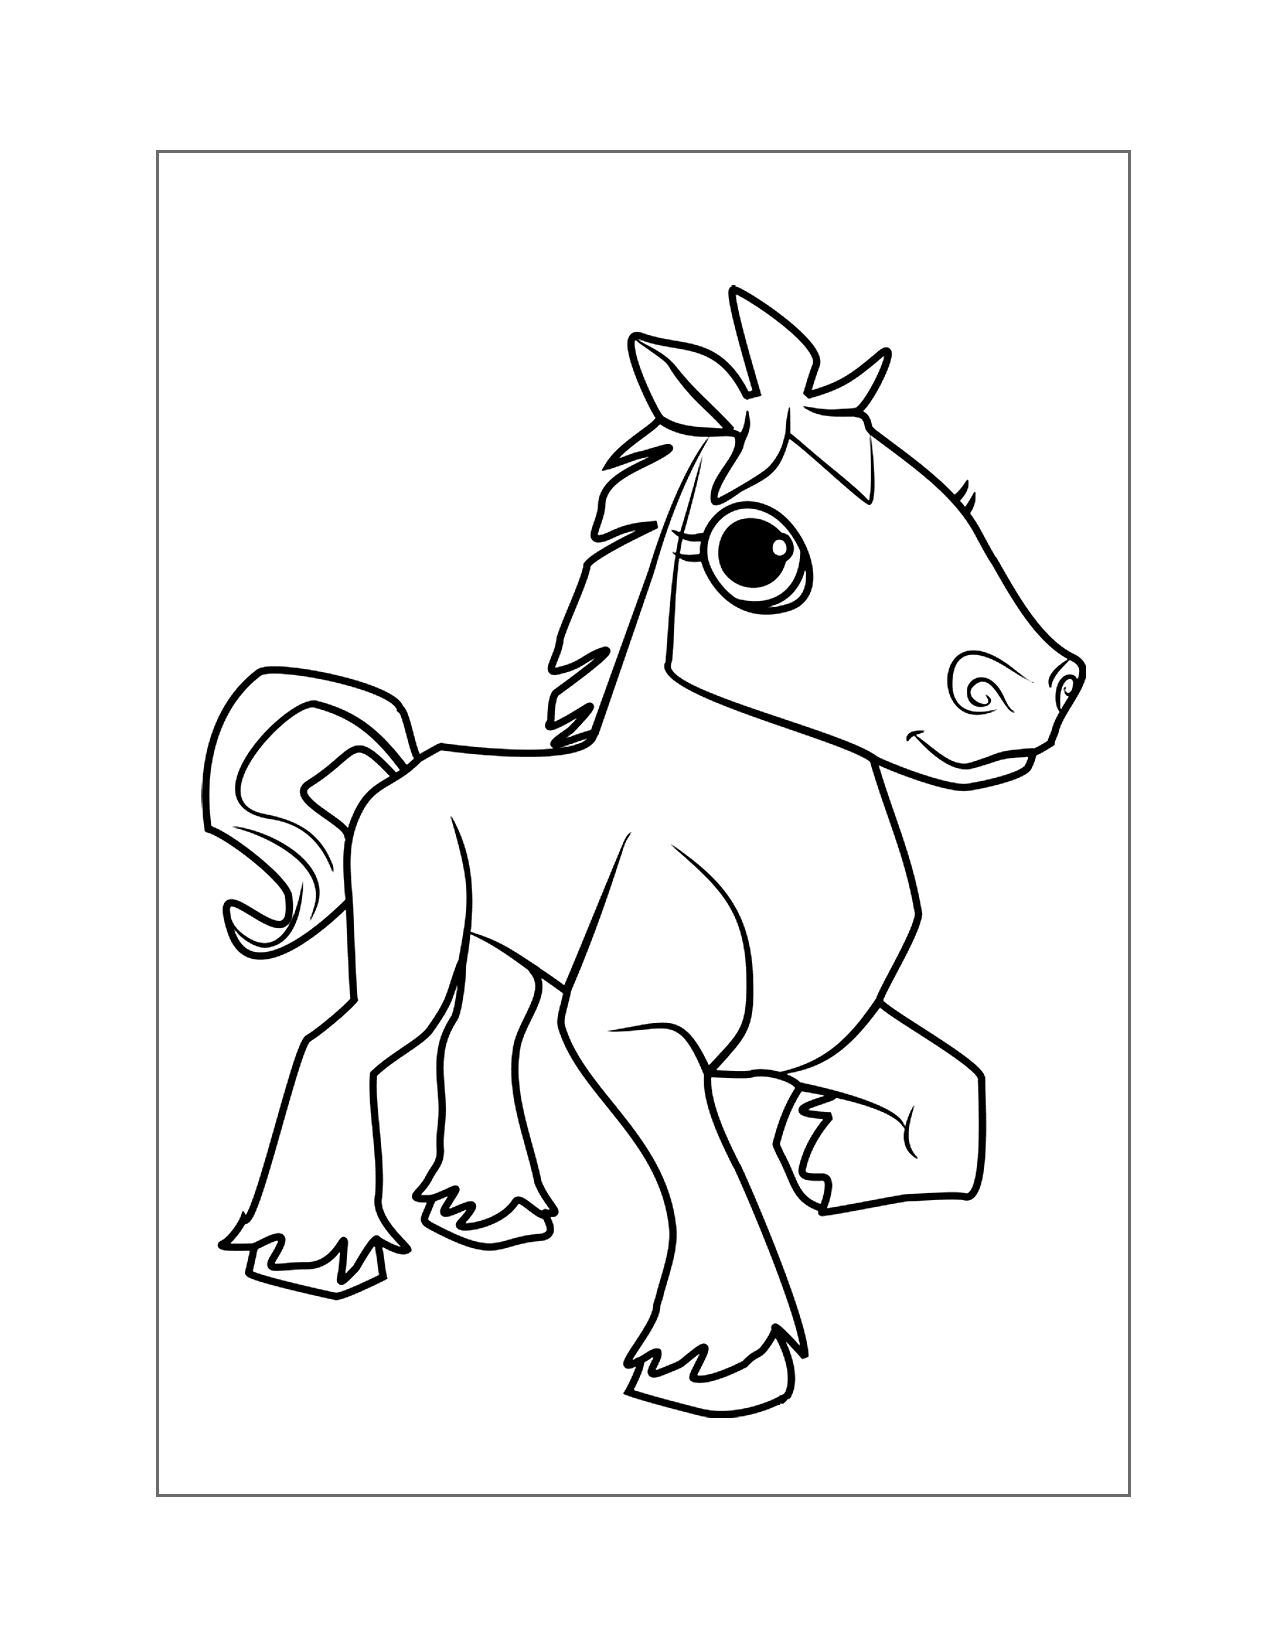 Animal Jam Horse Coloring Page